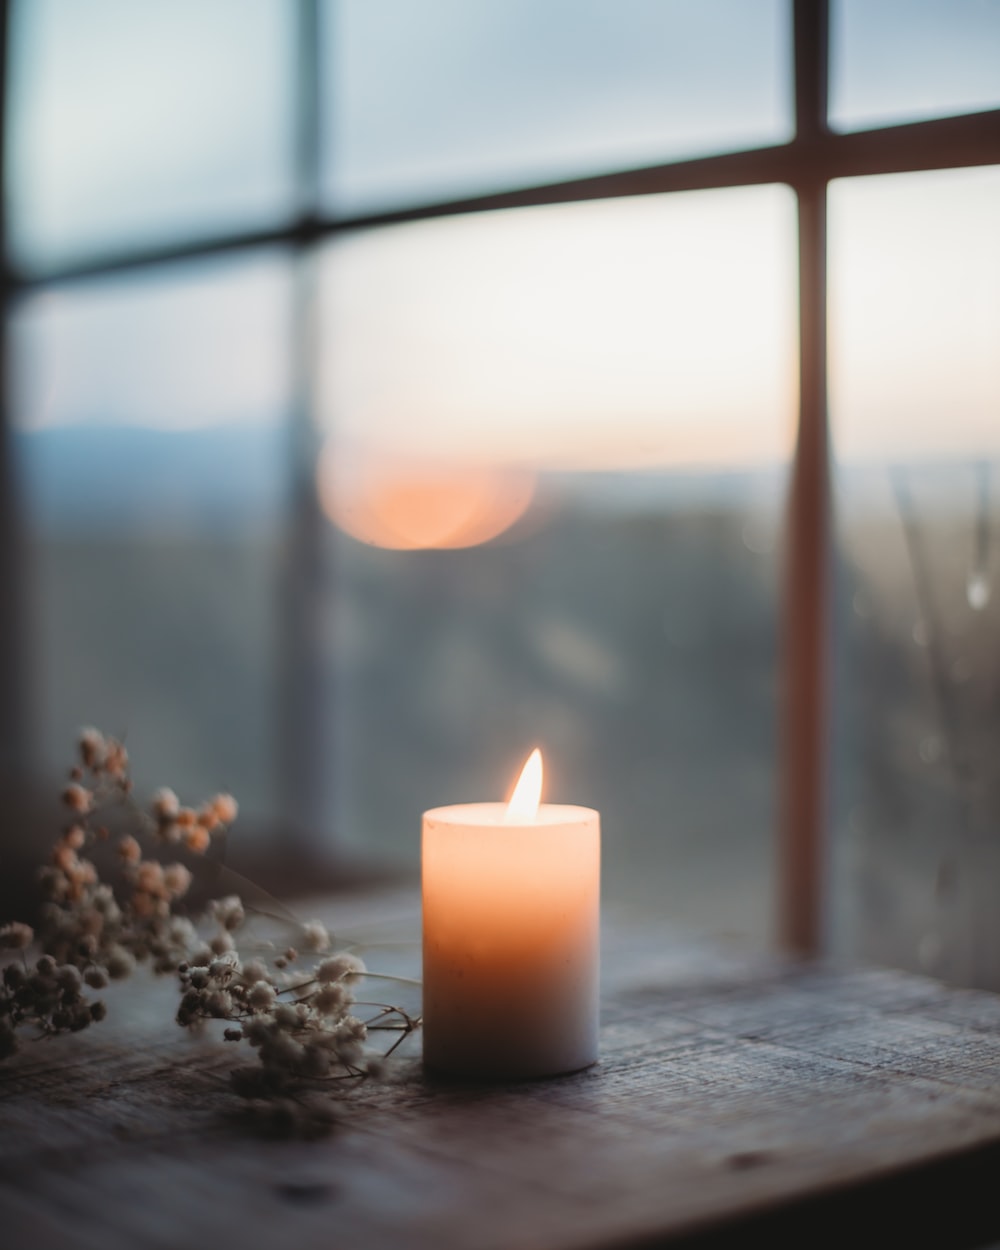 Candle Photos, Download The BEST Free Candle Stock Photos & HD Images